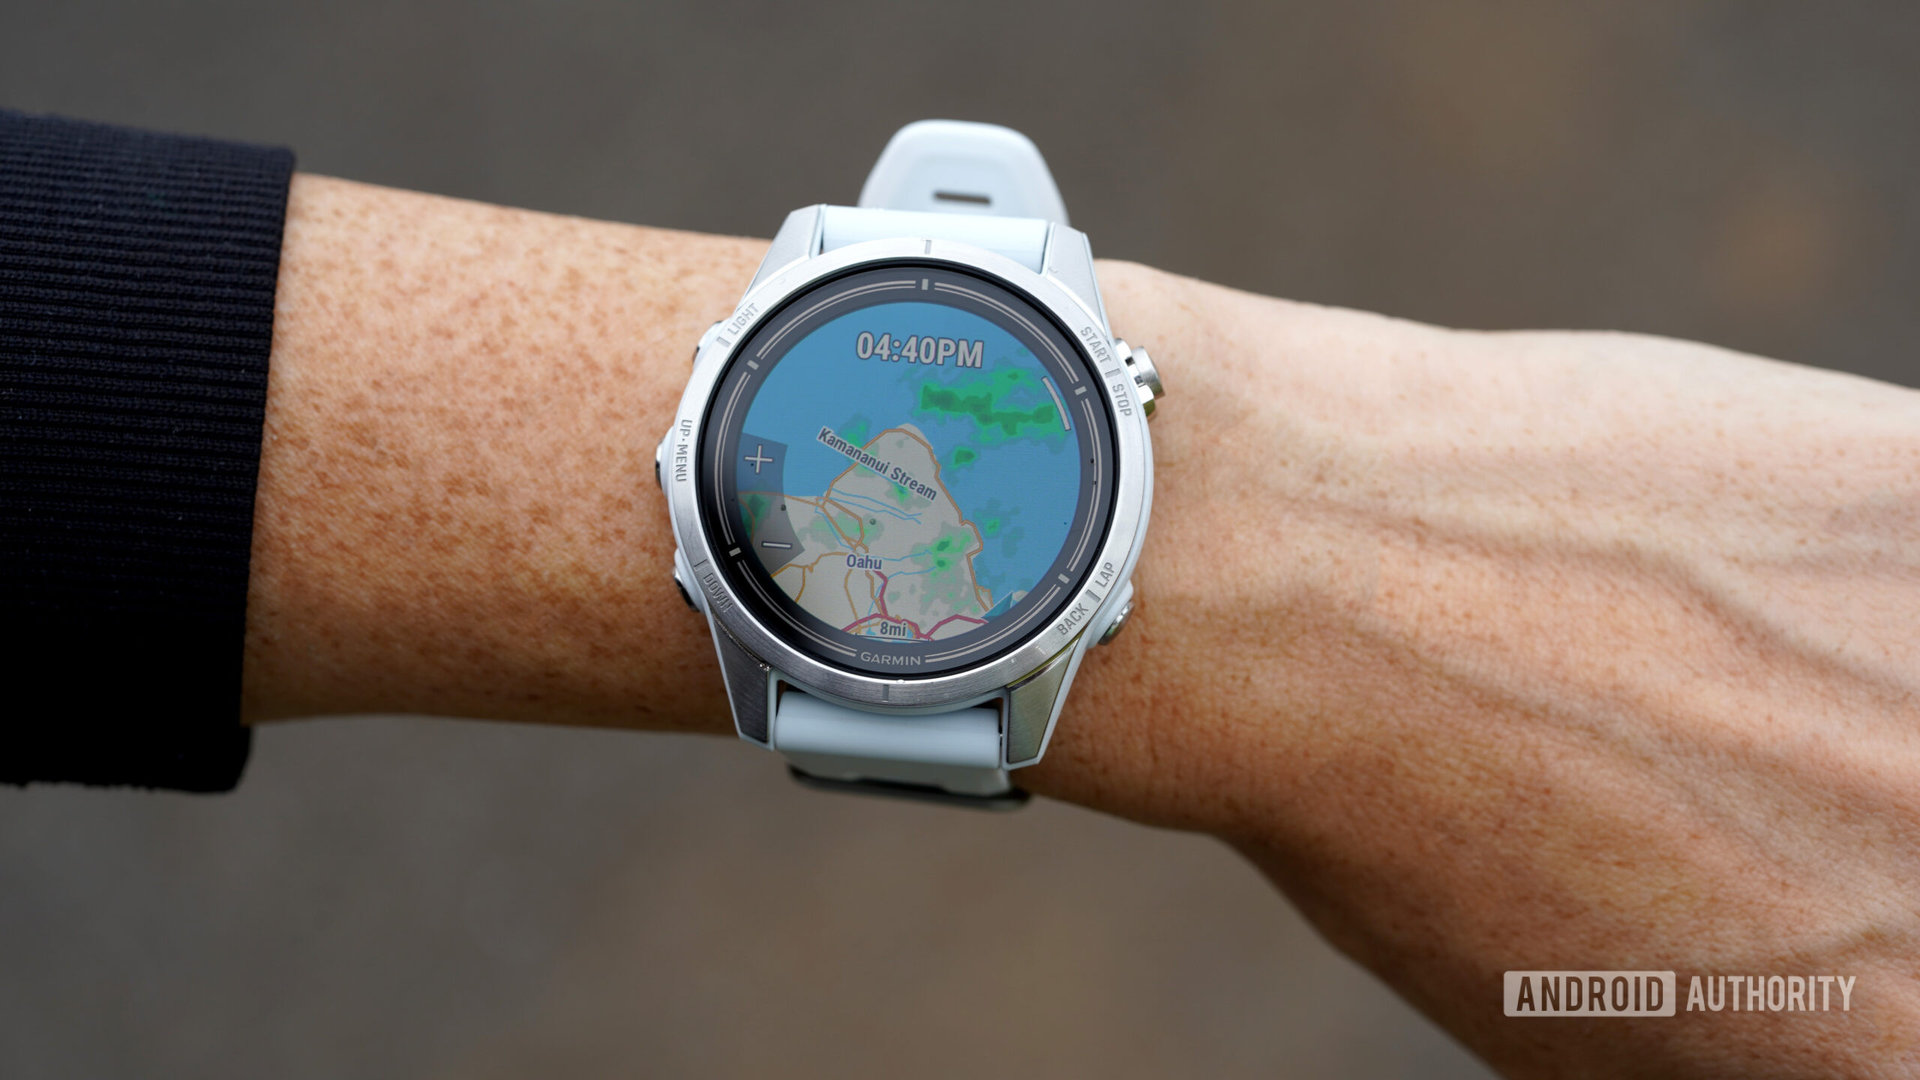 A Garmin Epix Pro displays a map of Oahu with a weather overlay.